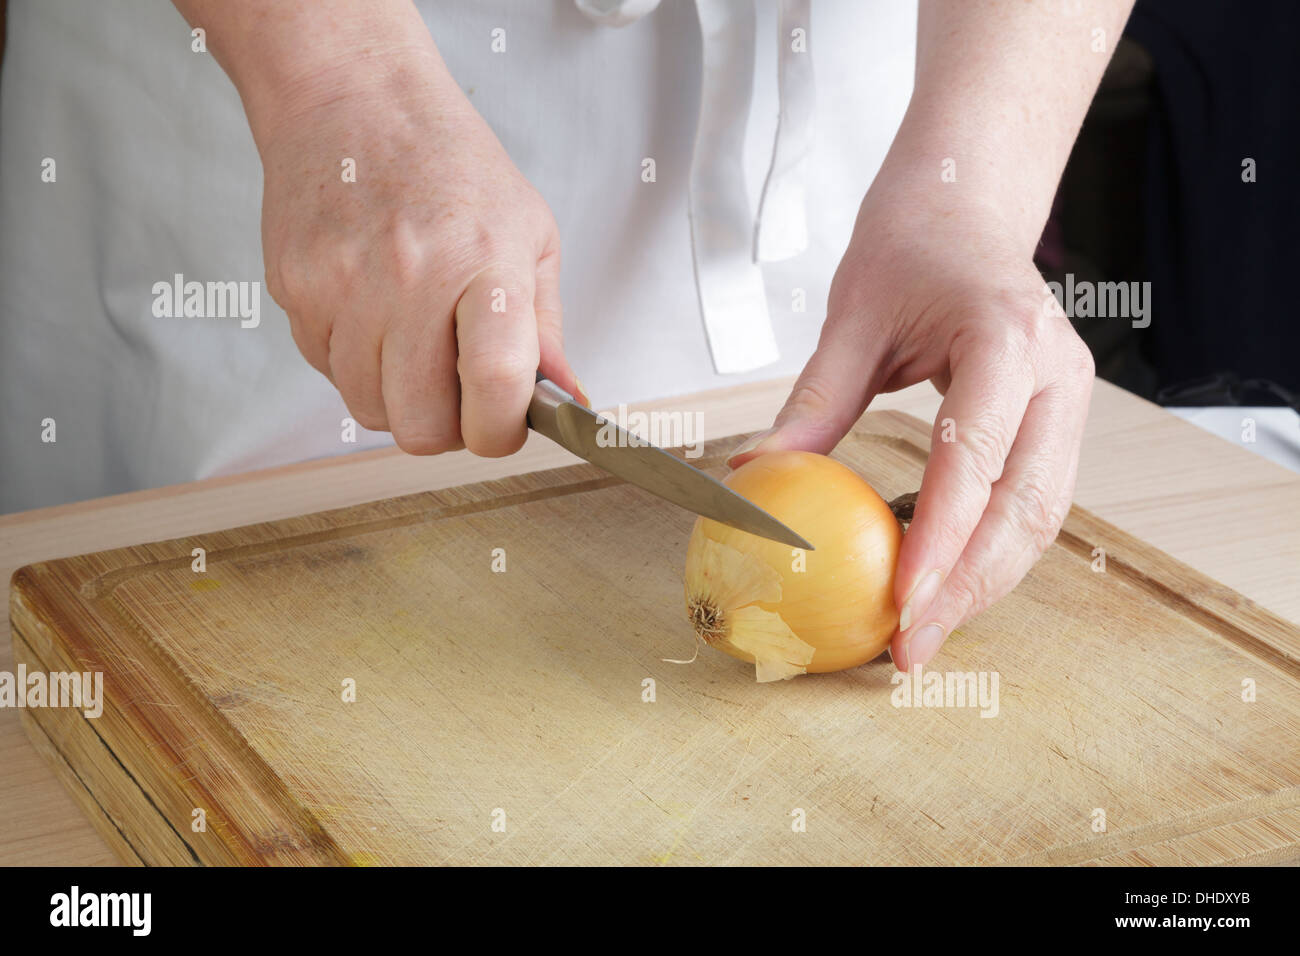 Cook chopping an onion Stock Photo